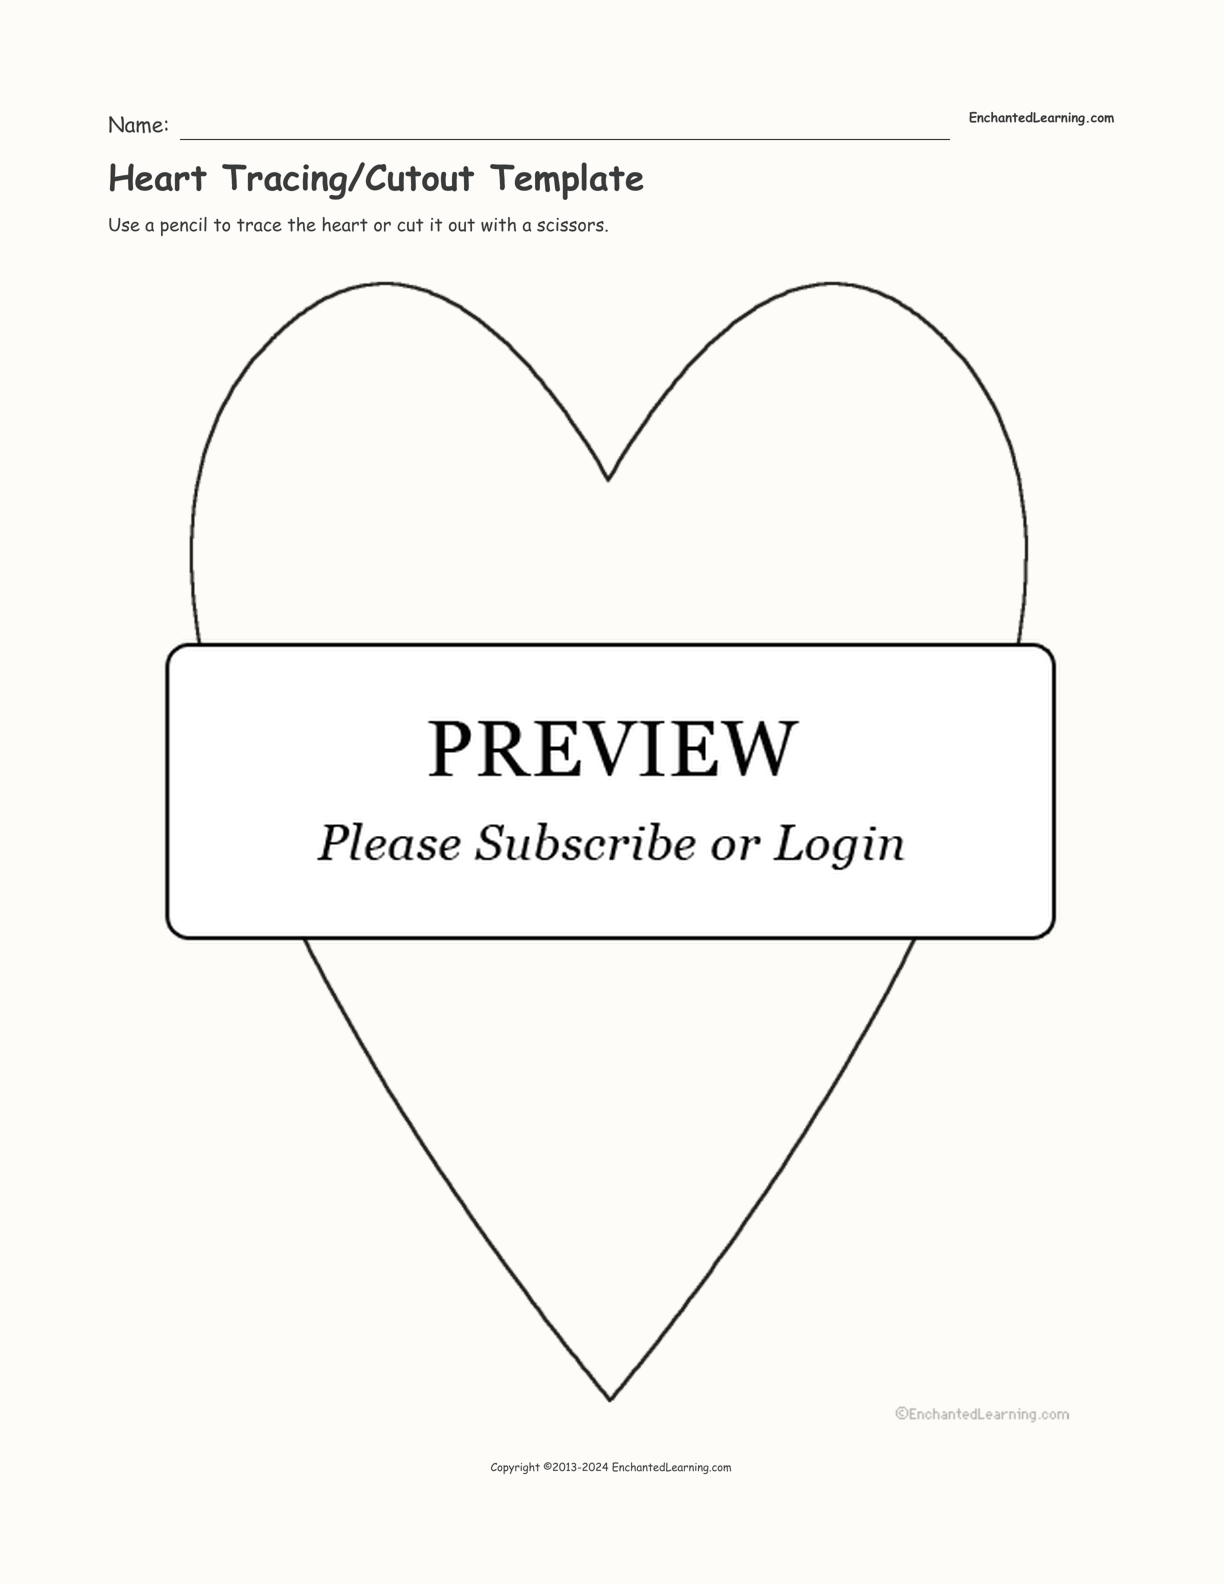 Heart Tracing/Cutout Template interactive worksheet page 1